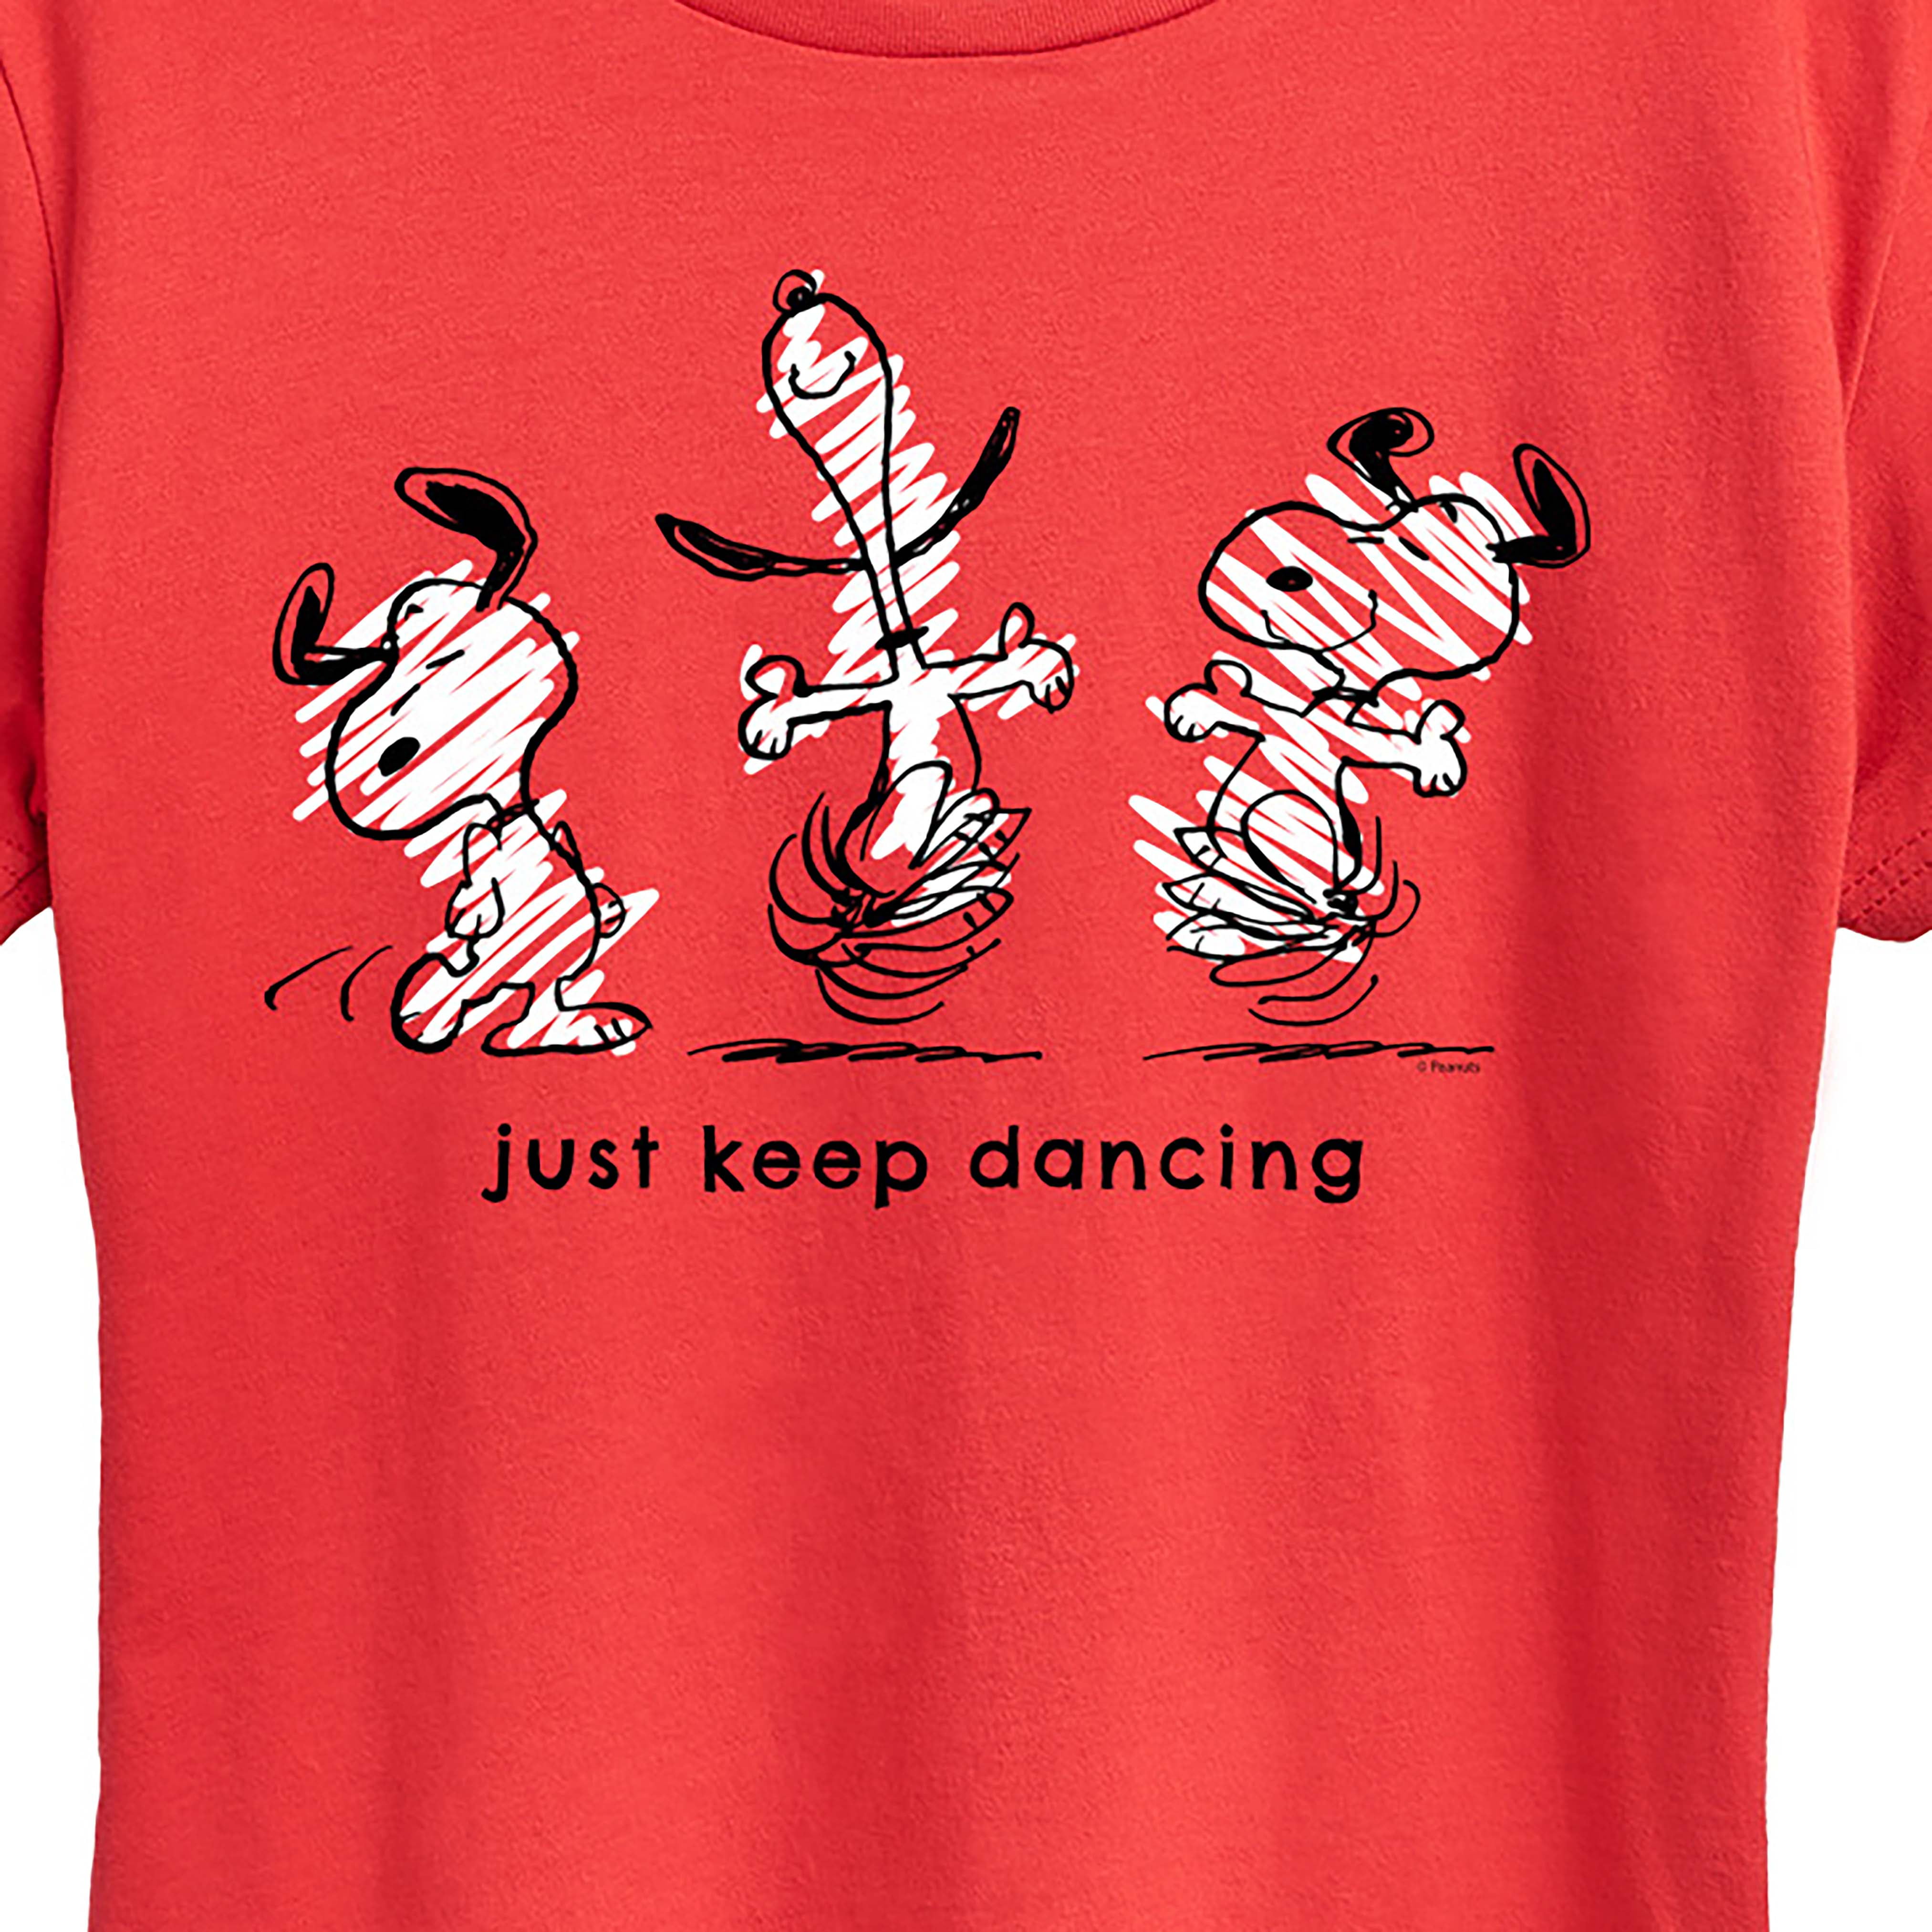 Peanuts - Snoopy Just Dancing Graphic Women\'s Sleeve Keep T-Shirt Short 